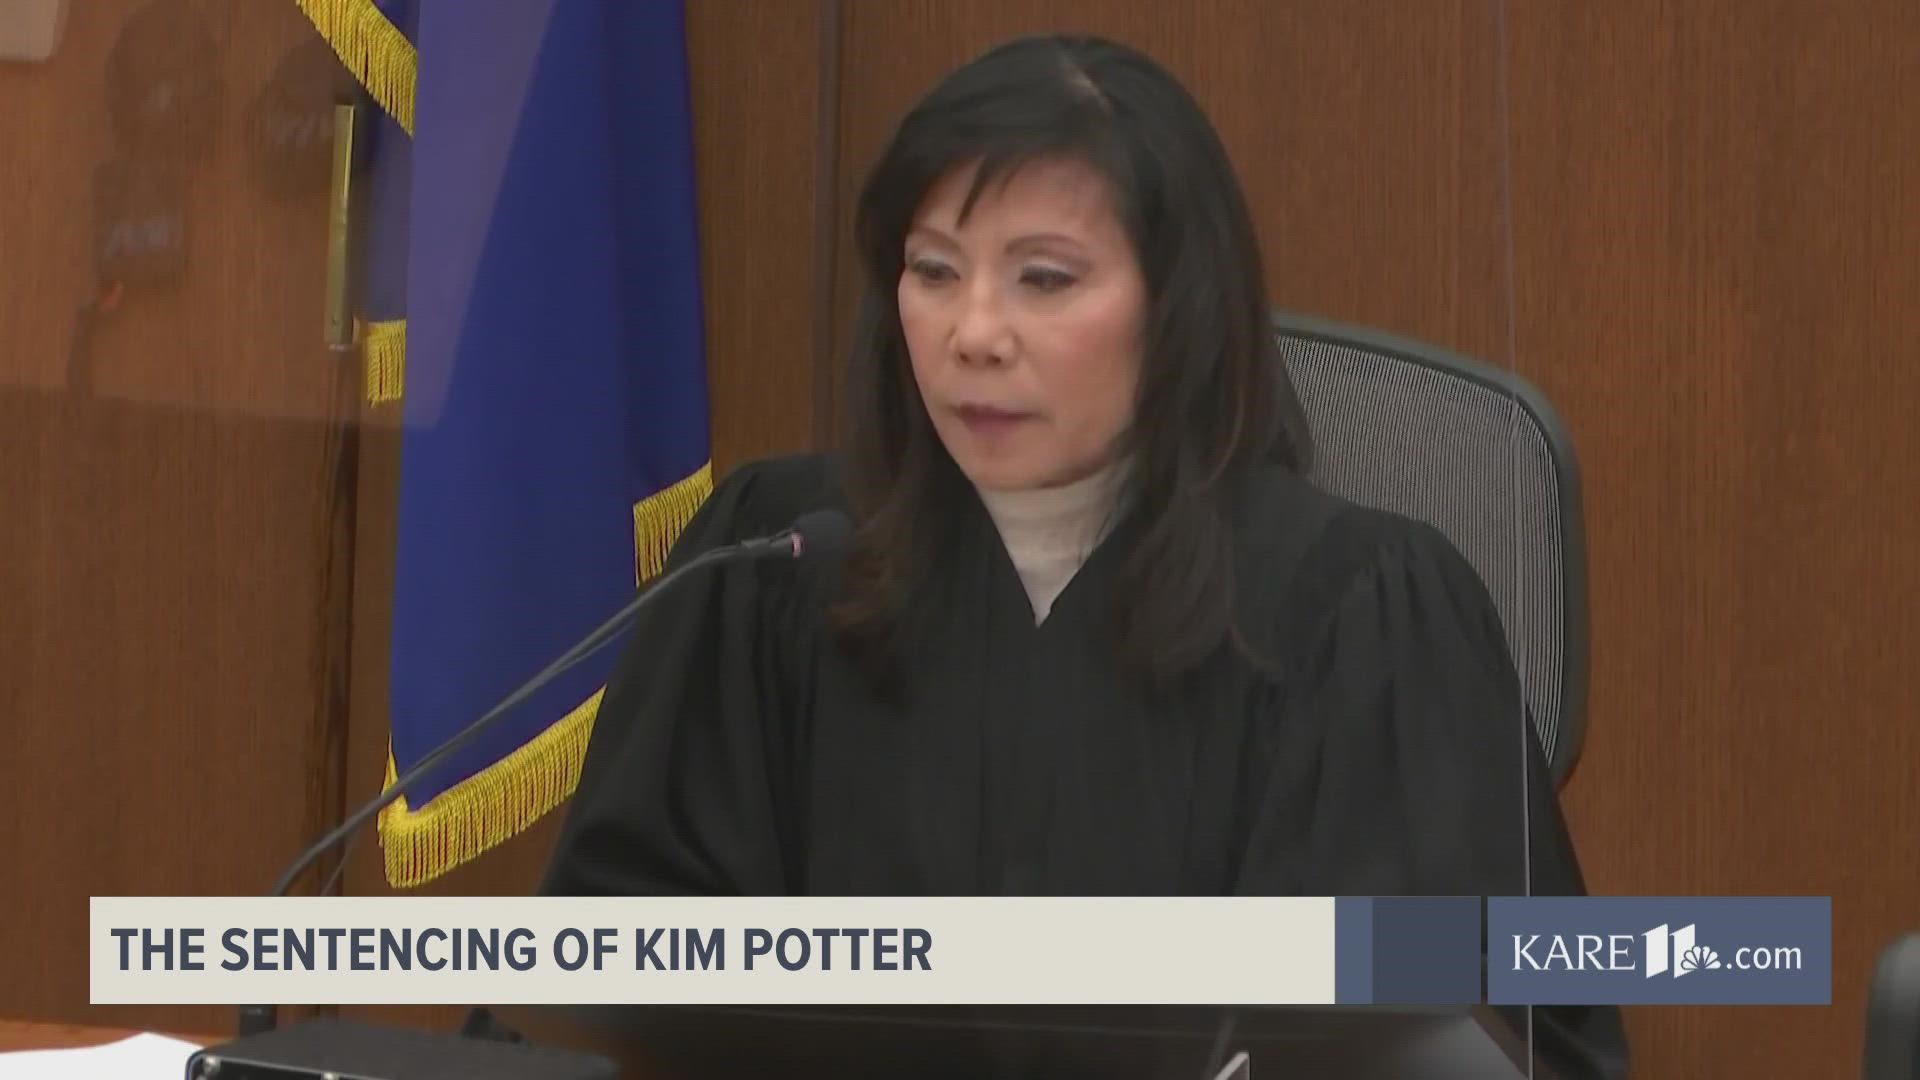 Hennepin County Judge Regina Chu sentenced former Brooklyn Center police officer Kim Potter to two years in prison for the shooting death of Daunte Wright.